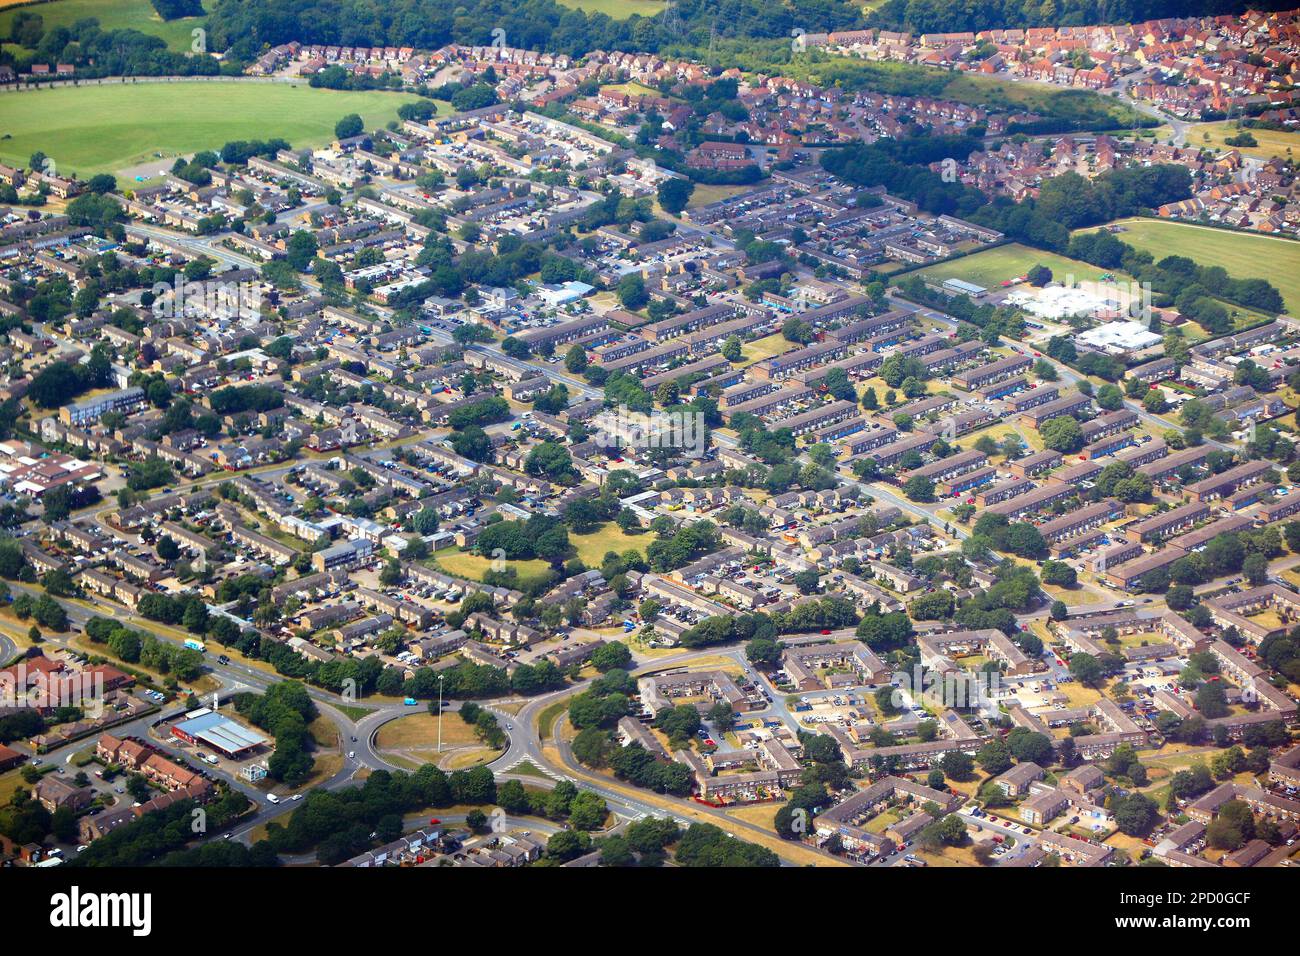 Stevenage town in Hertfordshire, England. Aerial view of St. Nicholas district. Stock Photo